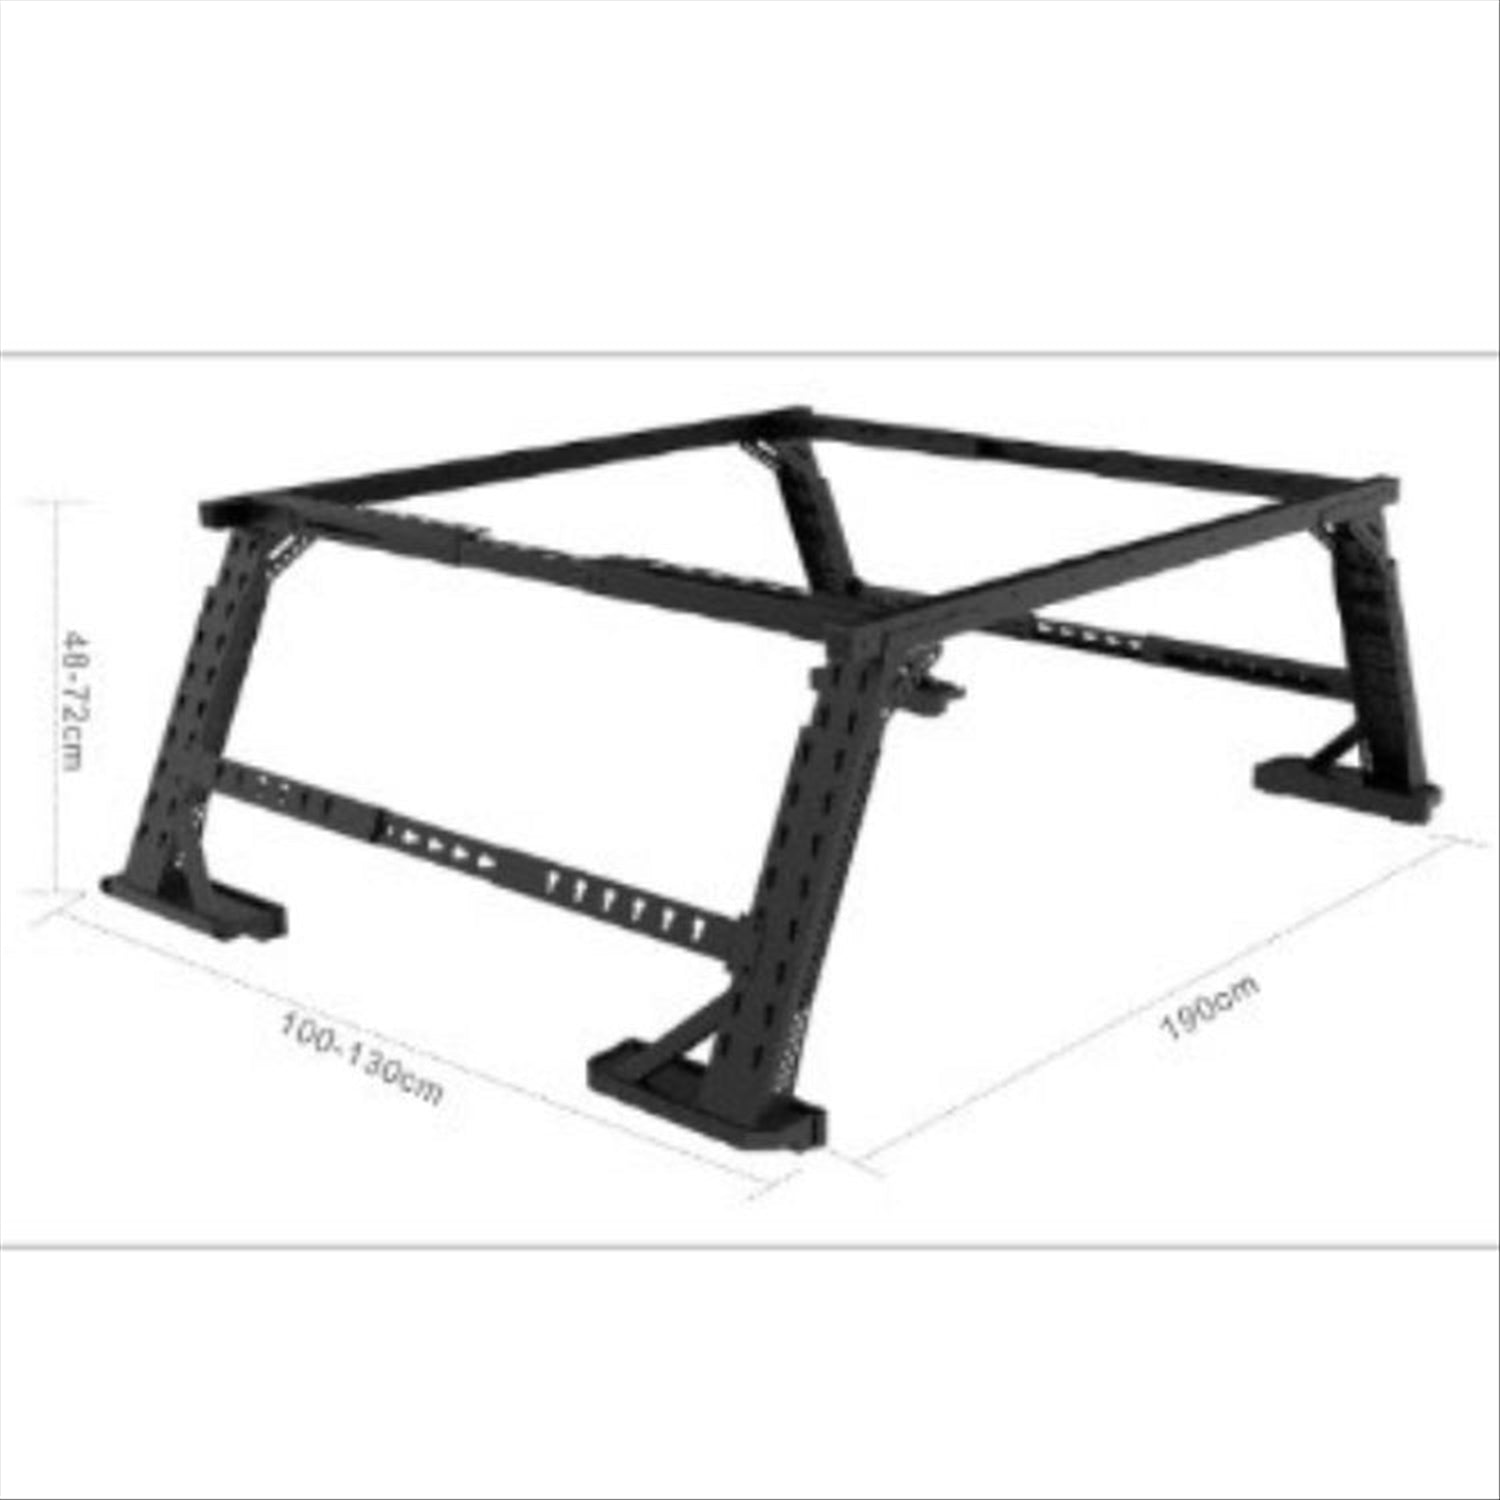 Wild Land Ute Tub Rack for Roof Top Tents